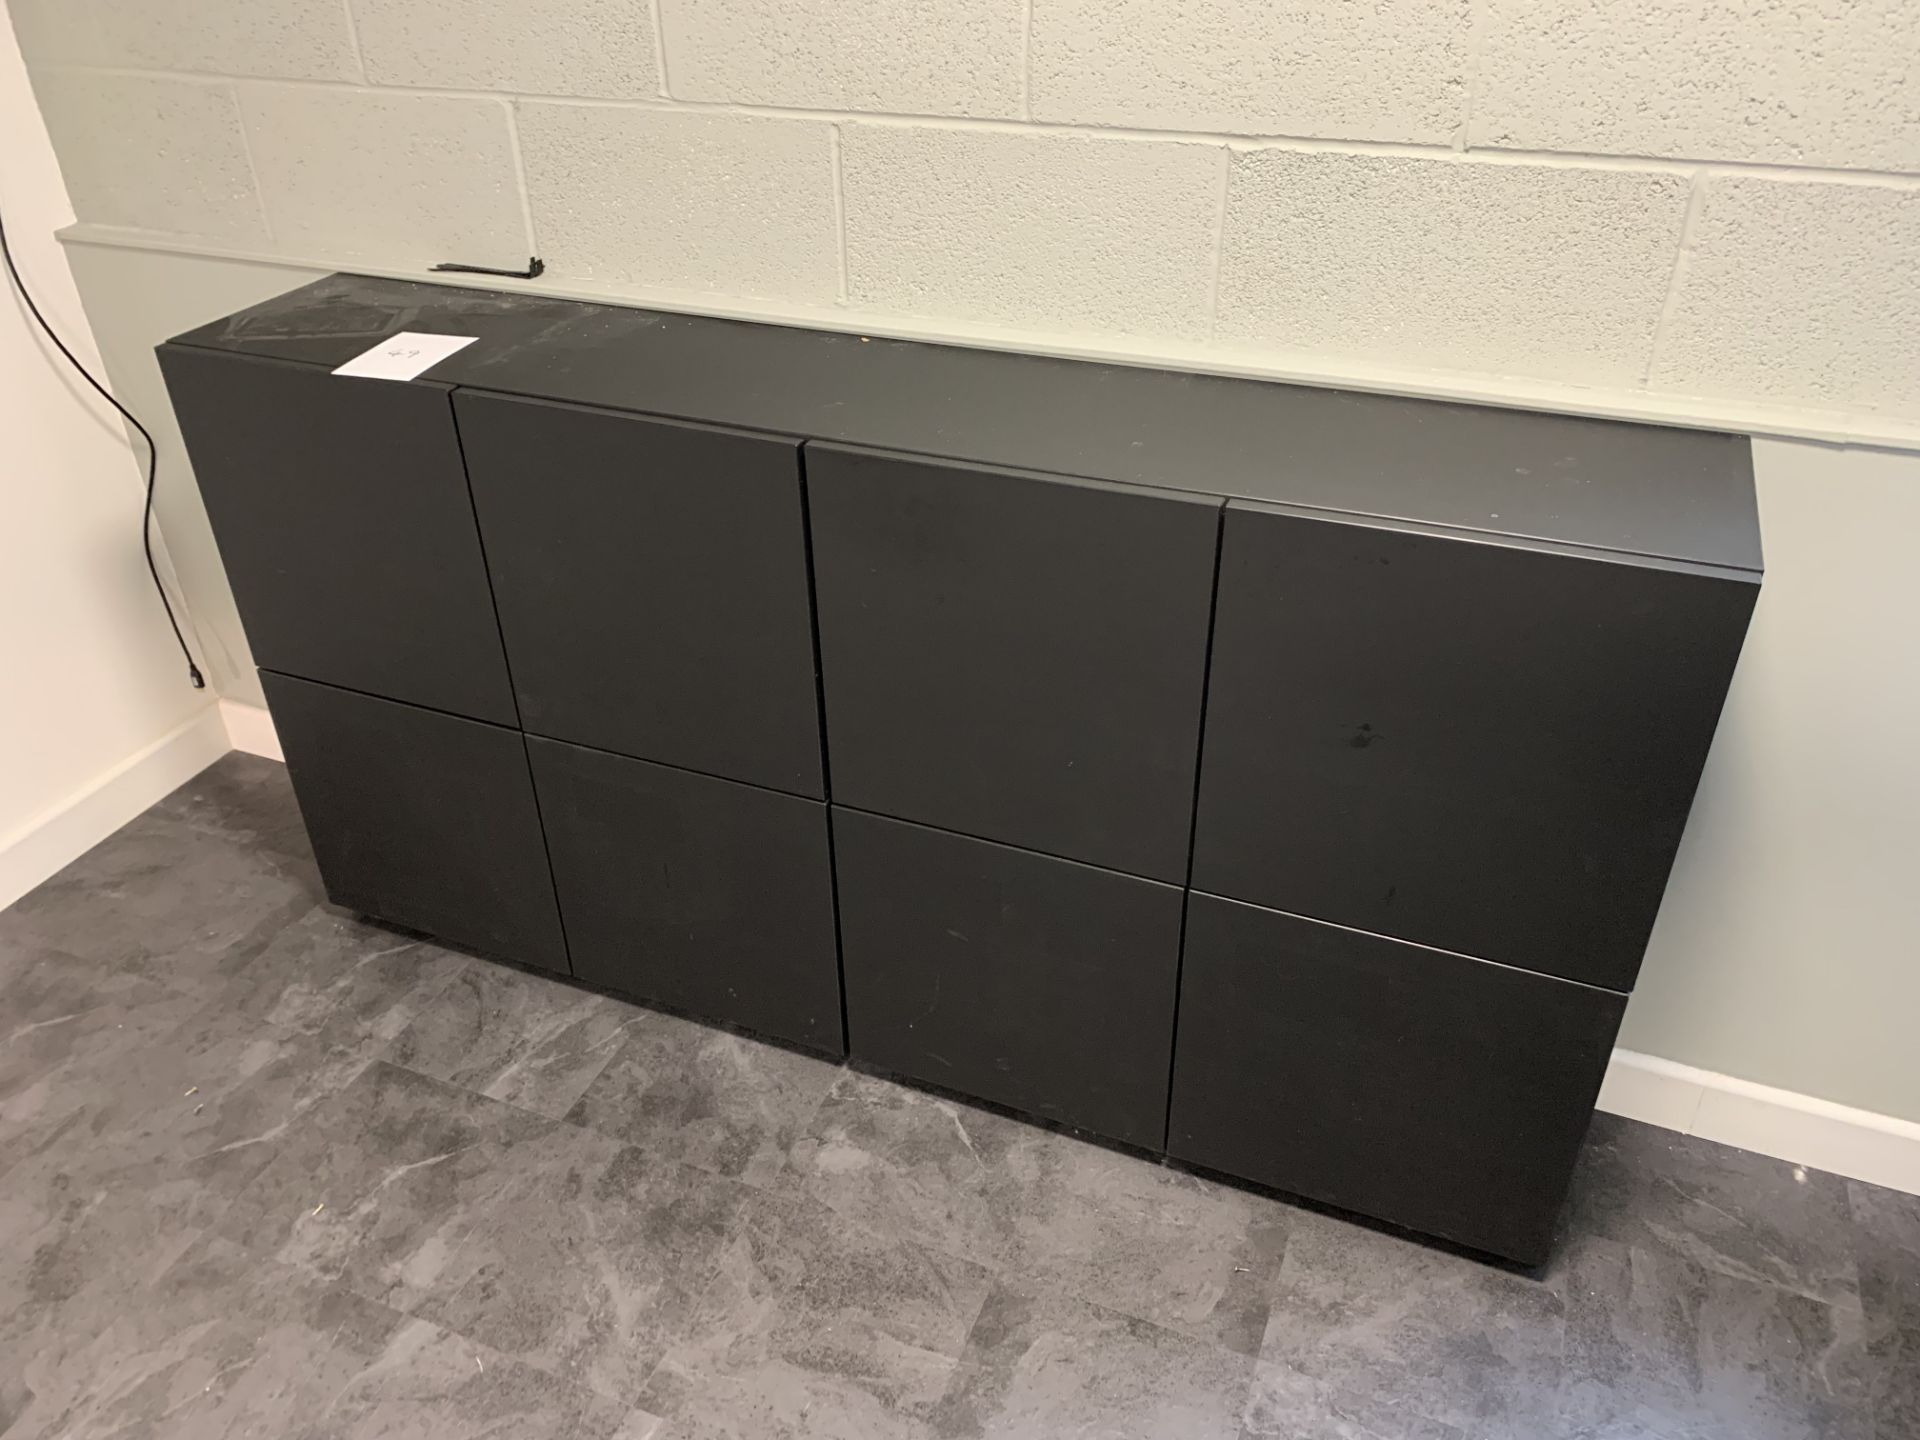 Black cupboard unit with 8 separate square cupboards